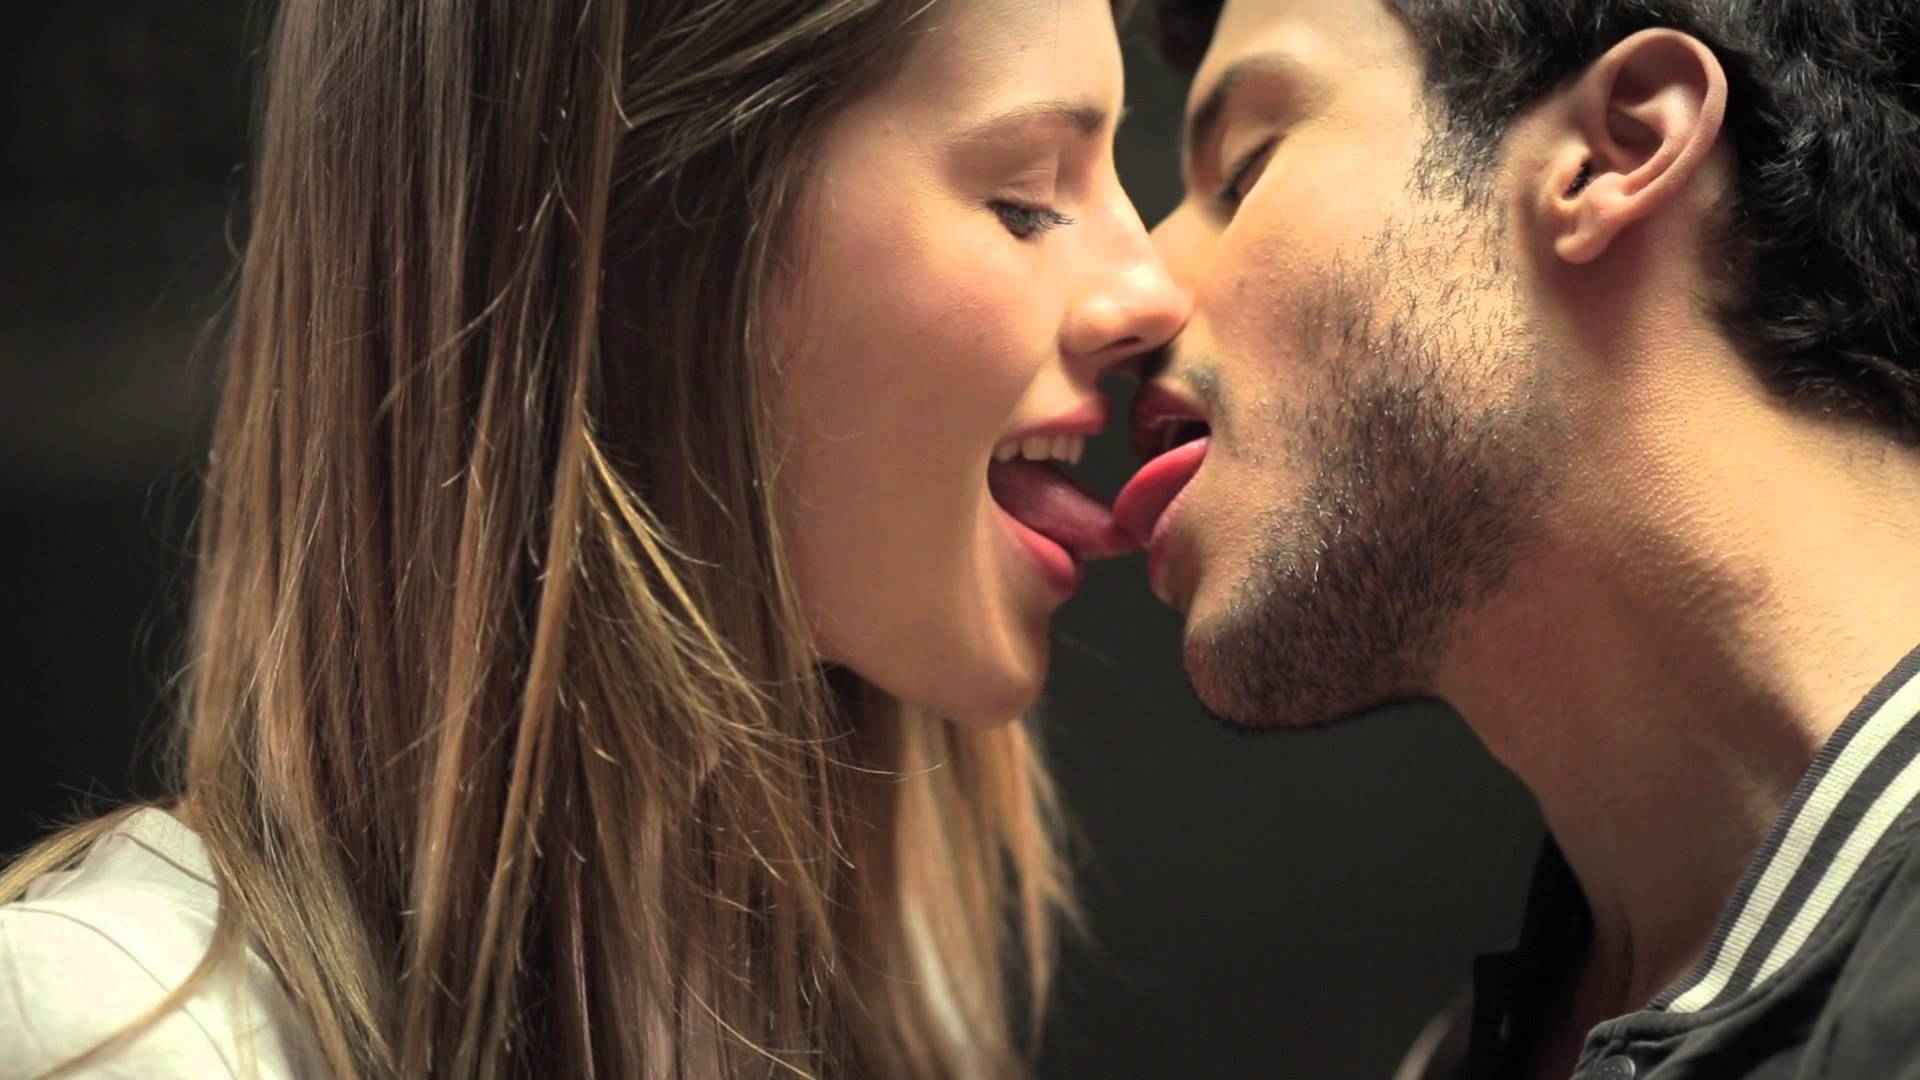 1920px x 1080px - Guy Girl Tongue Kissing - Best XXX Images, Free Porn Pics and Hot Sex  Photos on www.coverporn.com